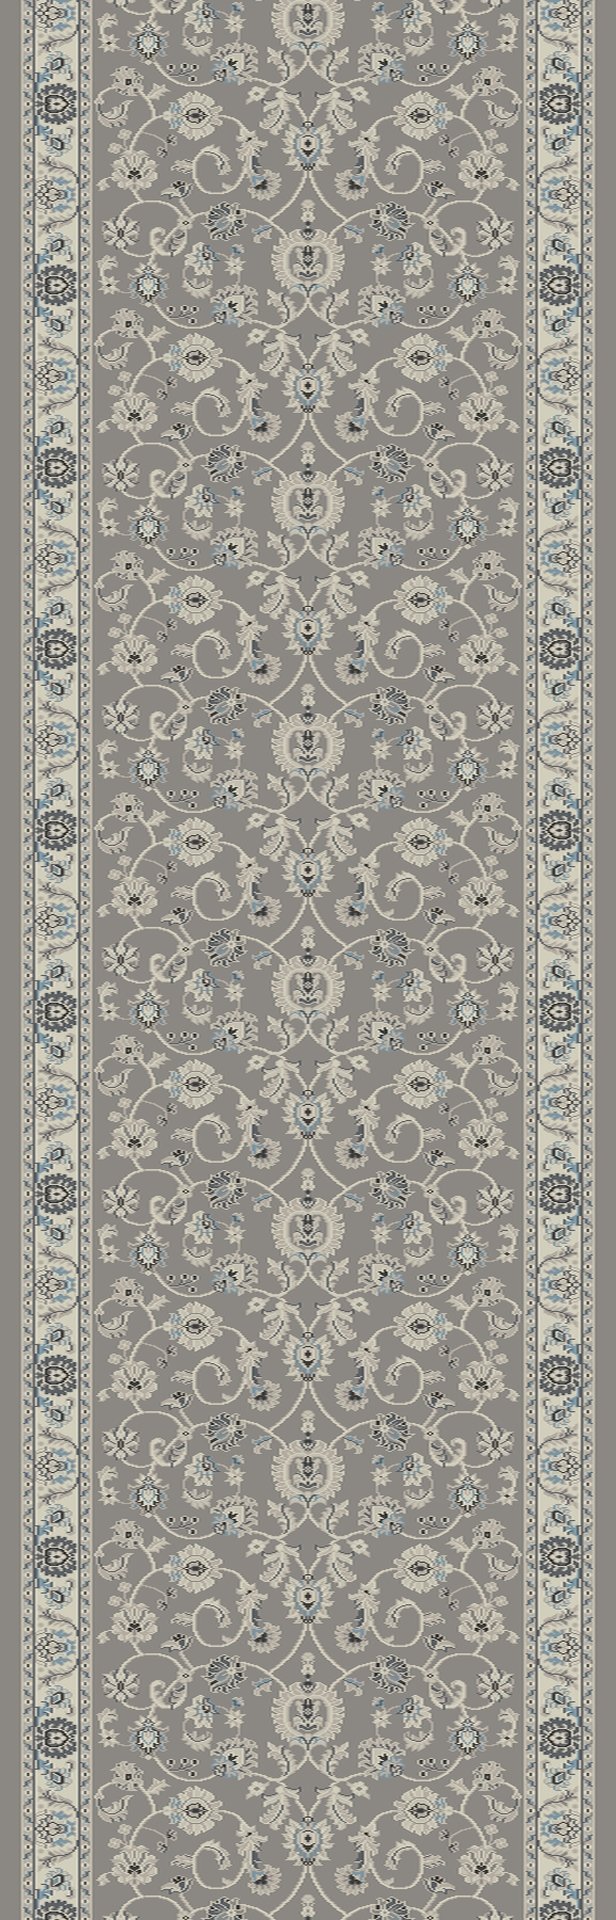 Provincia Grey Stair Runners 2816 By Rug Depot 8 Sizes Nashua On Sale